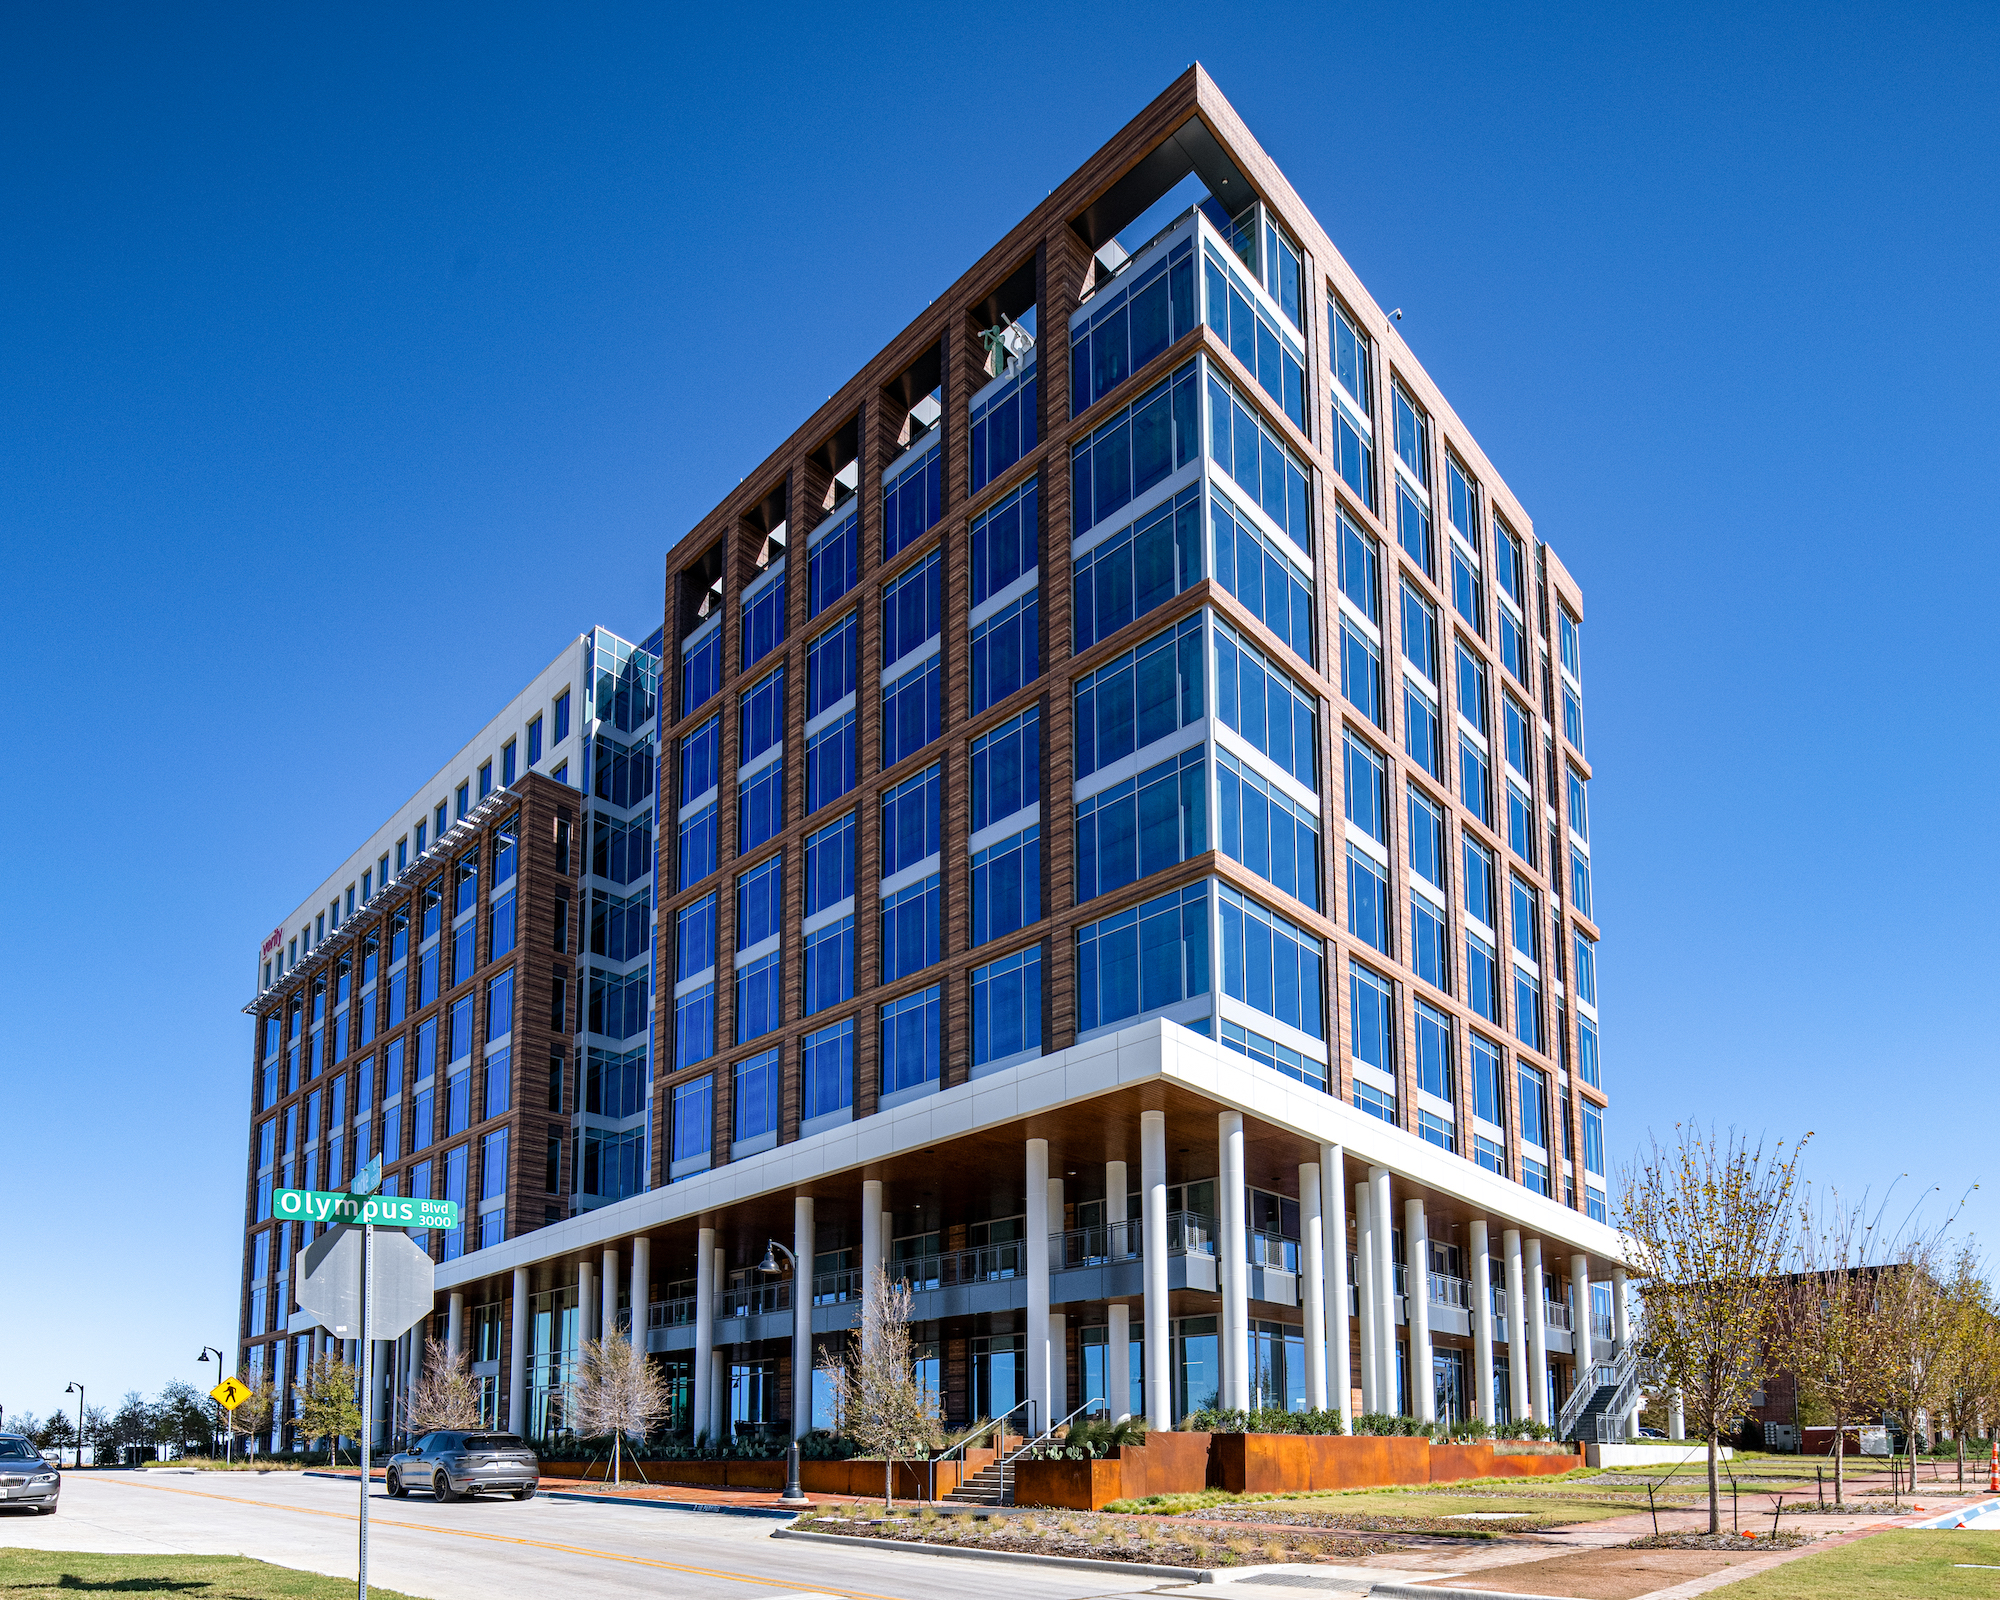 The 2999 Olympus office building near DFW Airport is now home to two Alphabet companies